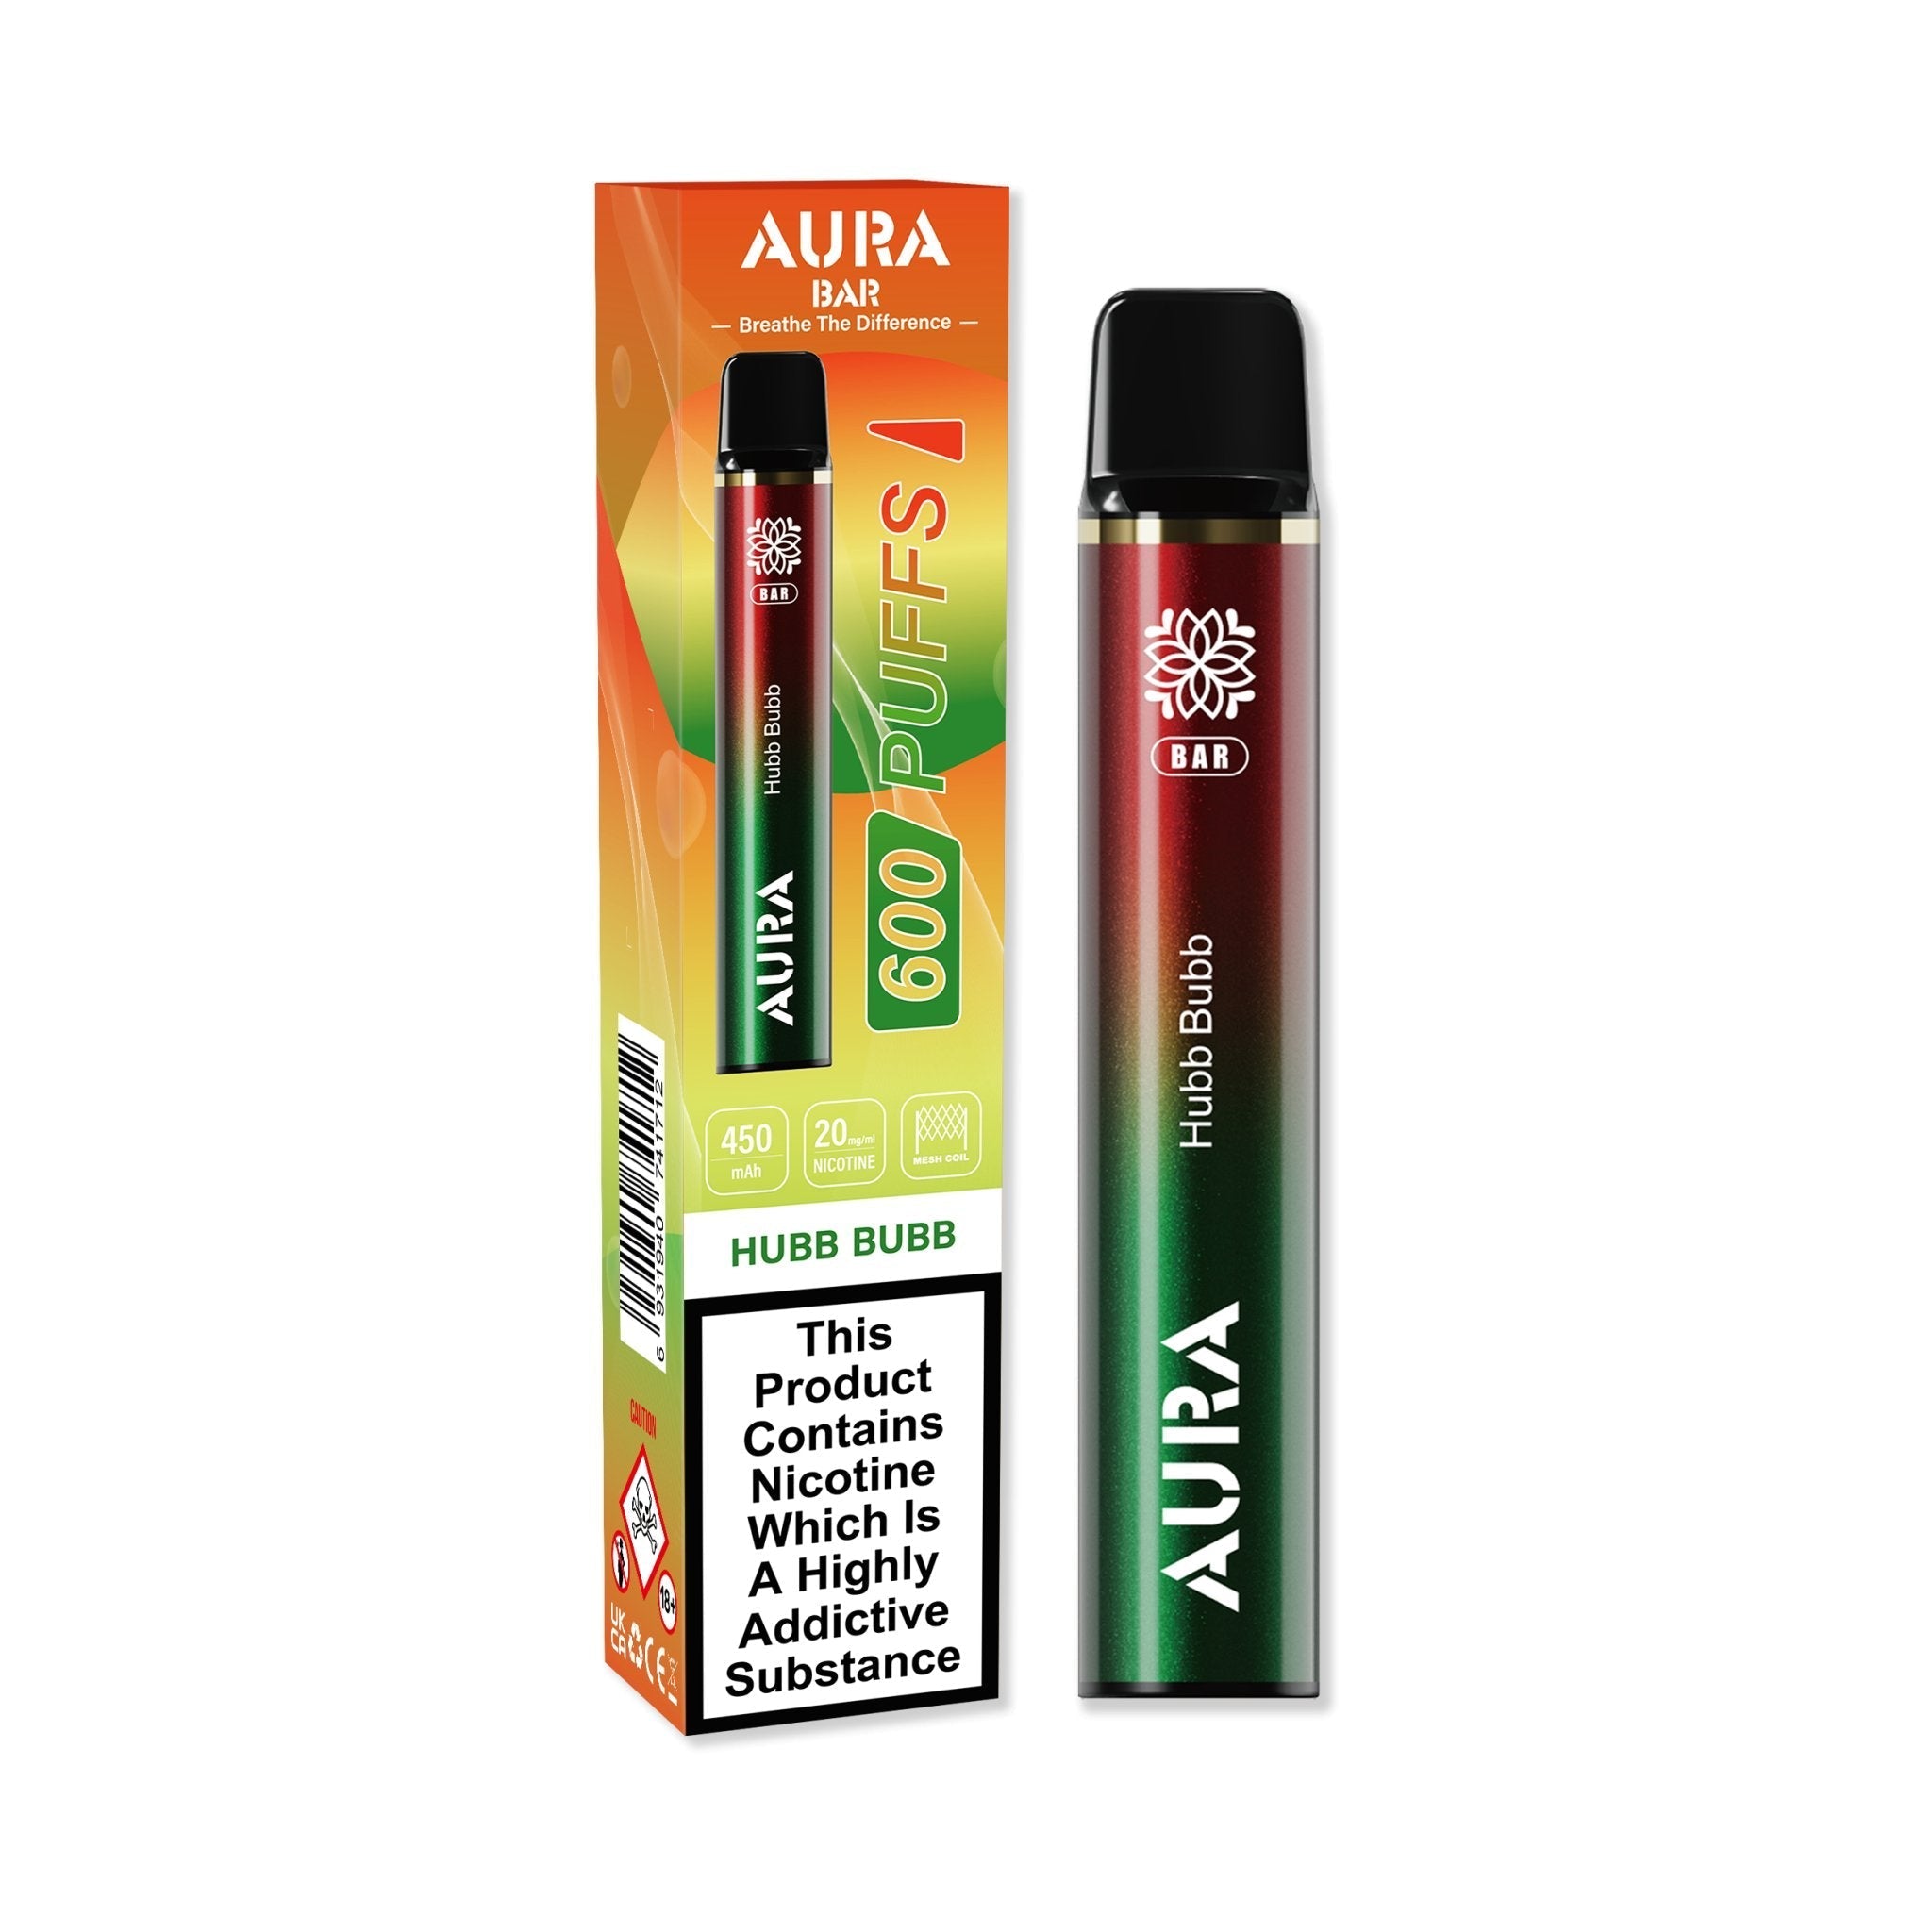 Aura Bar 600 Puffs Disposable Vape By Crystal Prime - Wolfvapes.co.uk-Hubb Bubb